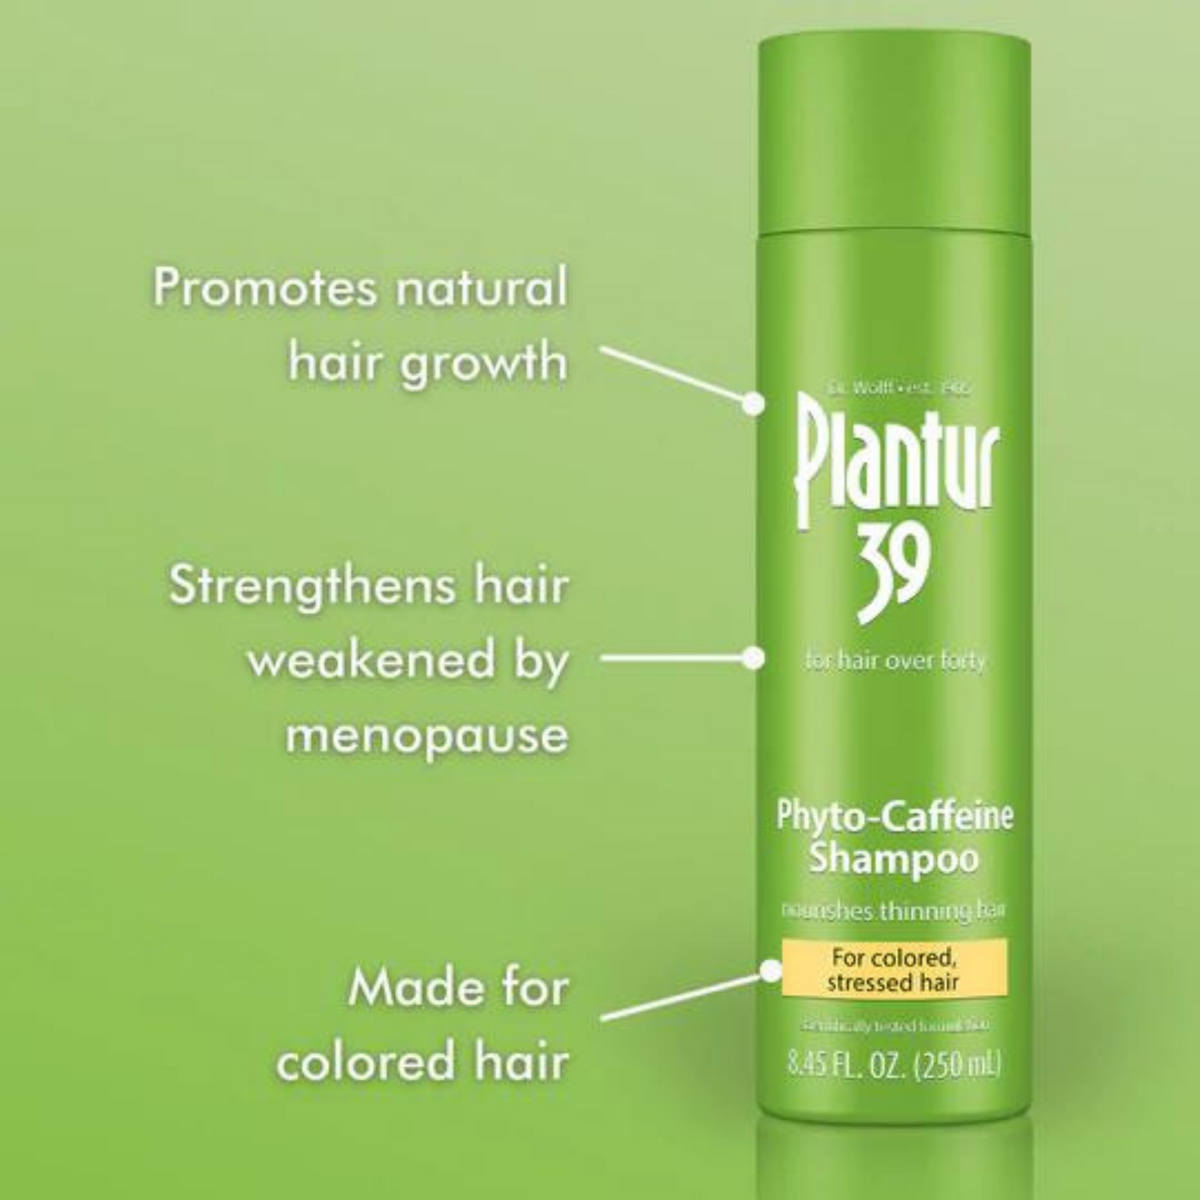 Plantur 39 Colored and Stressed Hair Shampoo (250 ml) #10084903